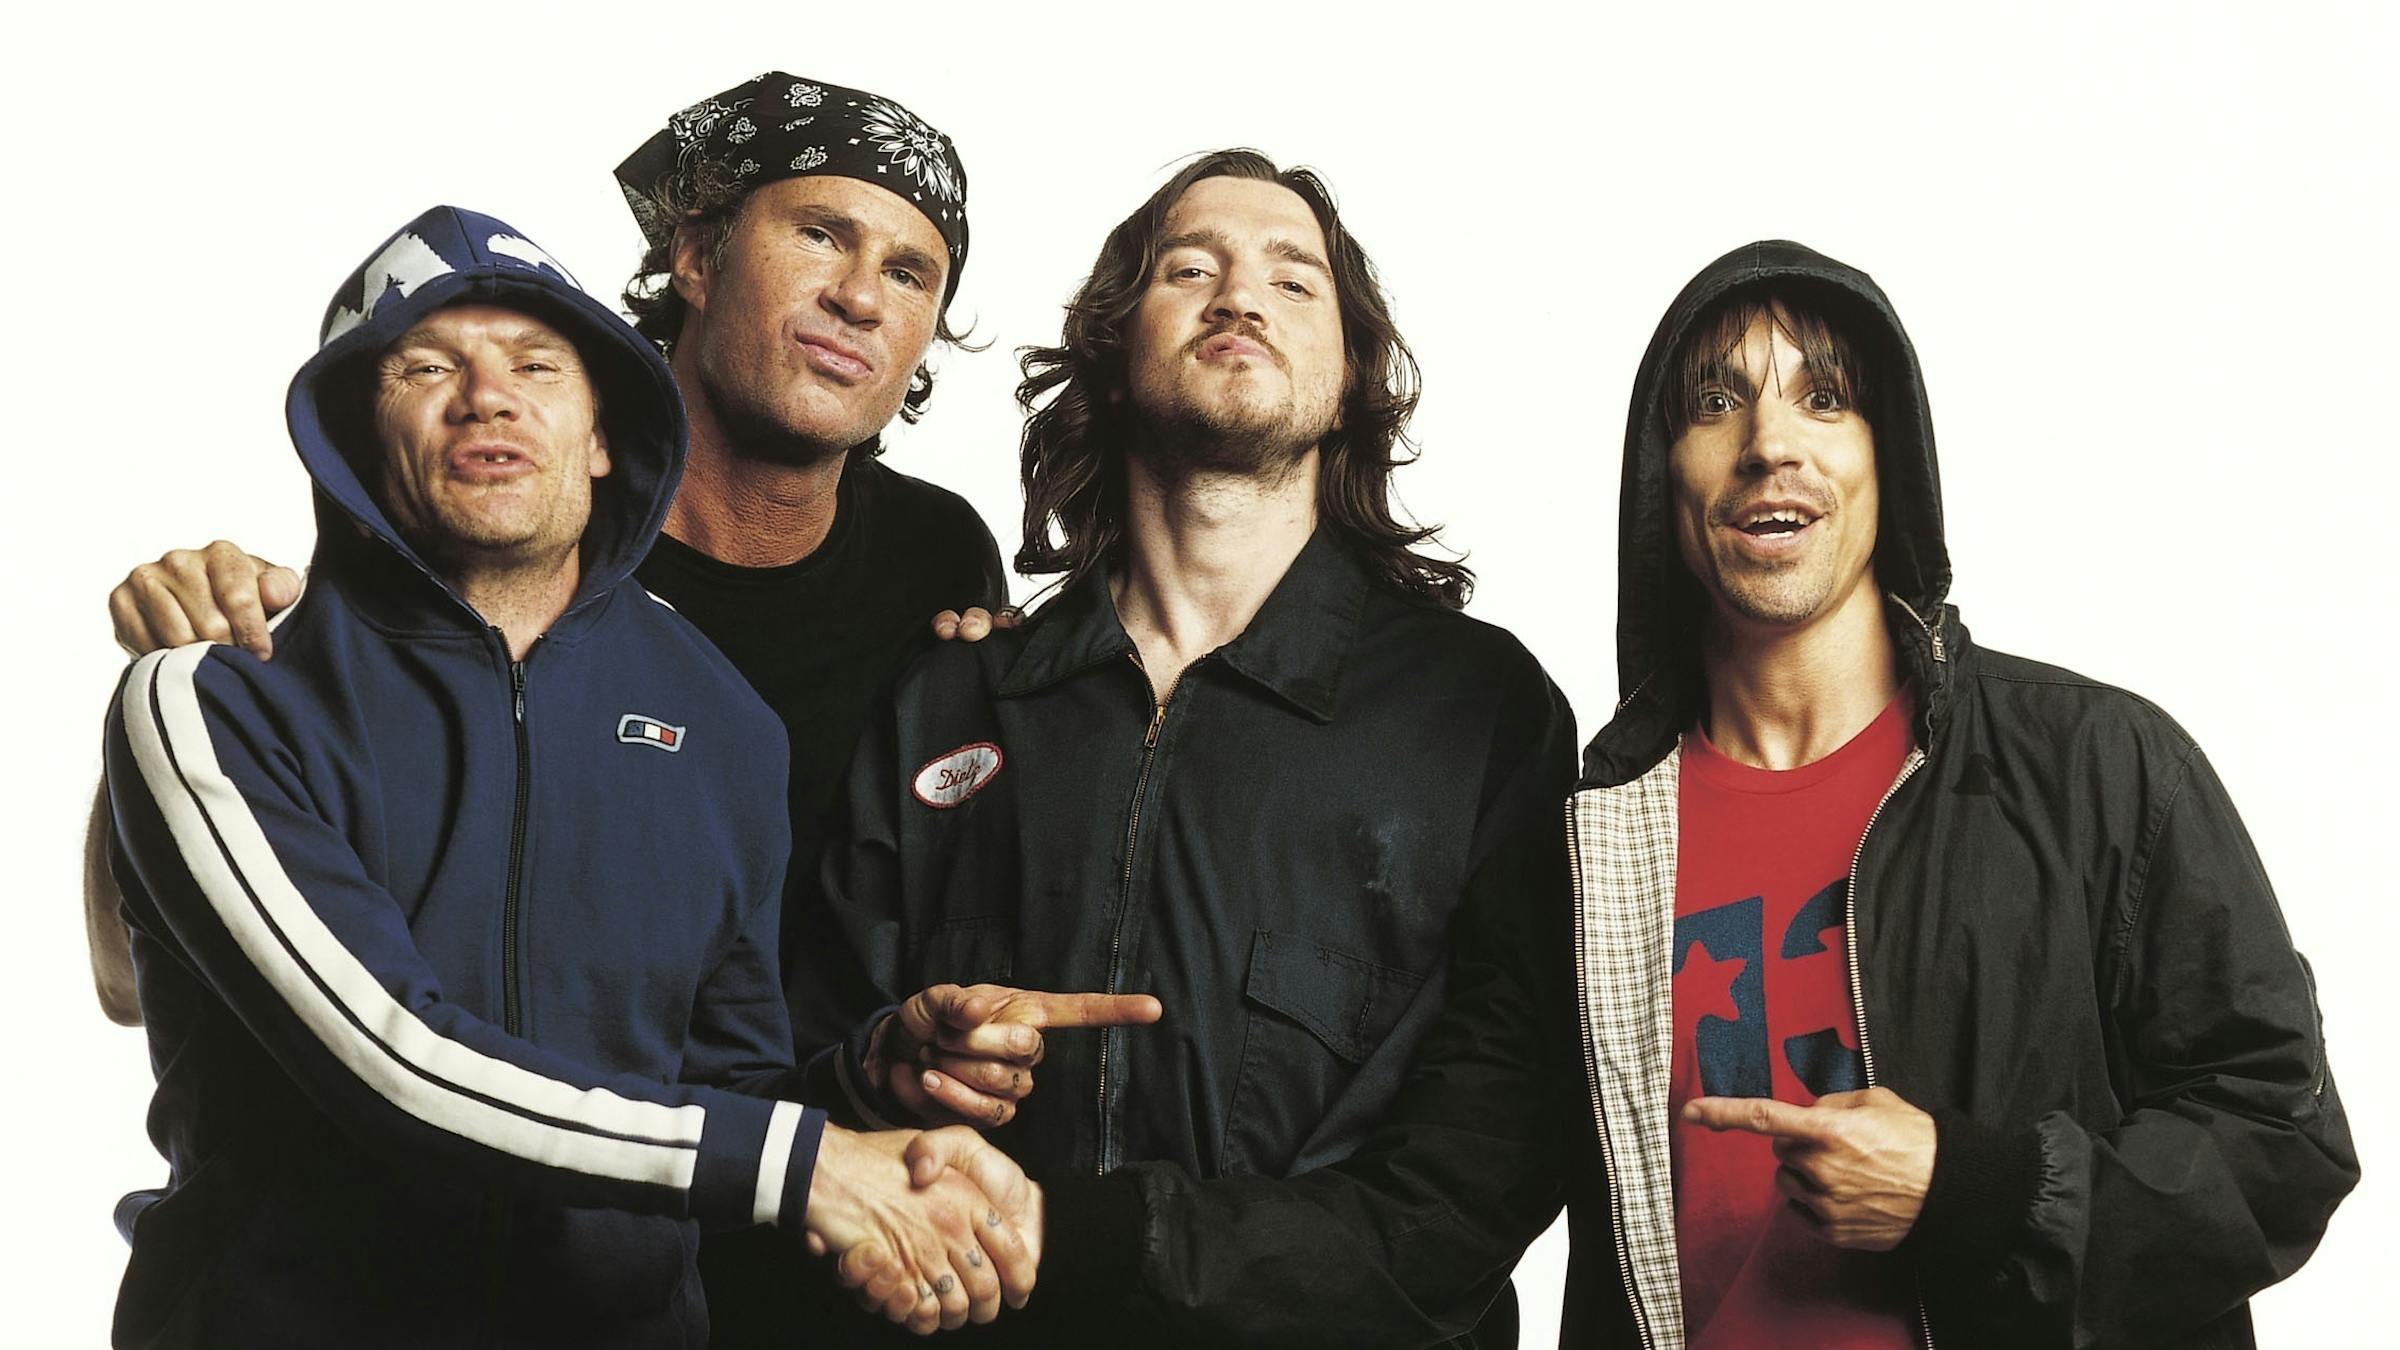 Chad Smith Confirms Red Hot Chili Peppers Are Recording An Album With John Frusciante